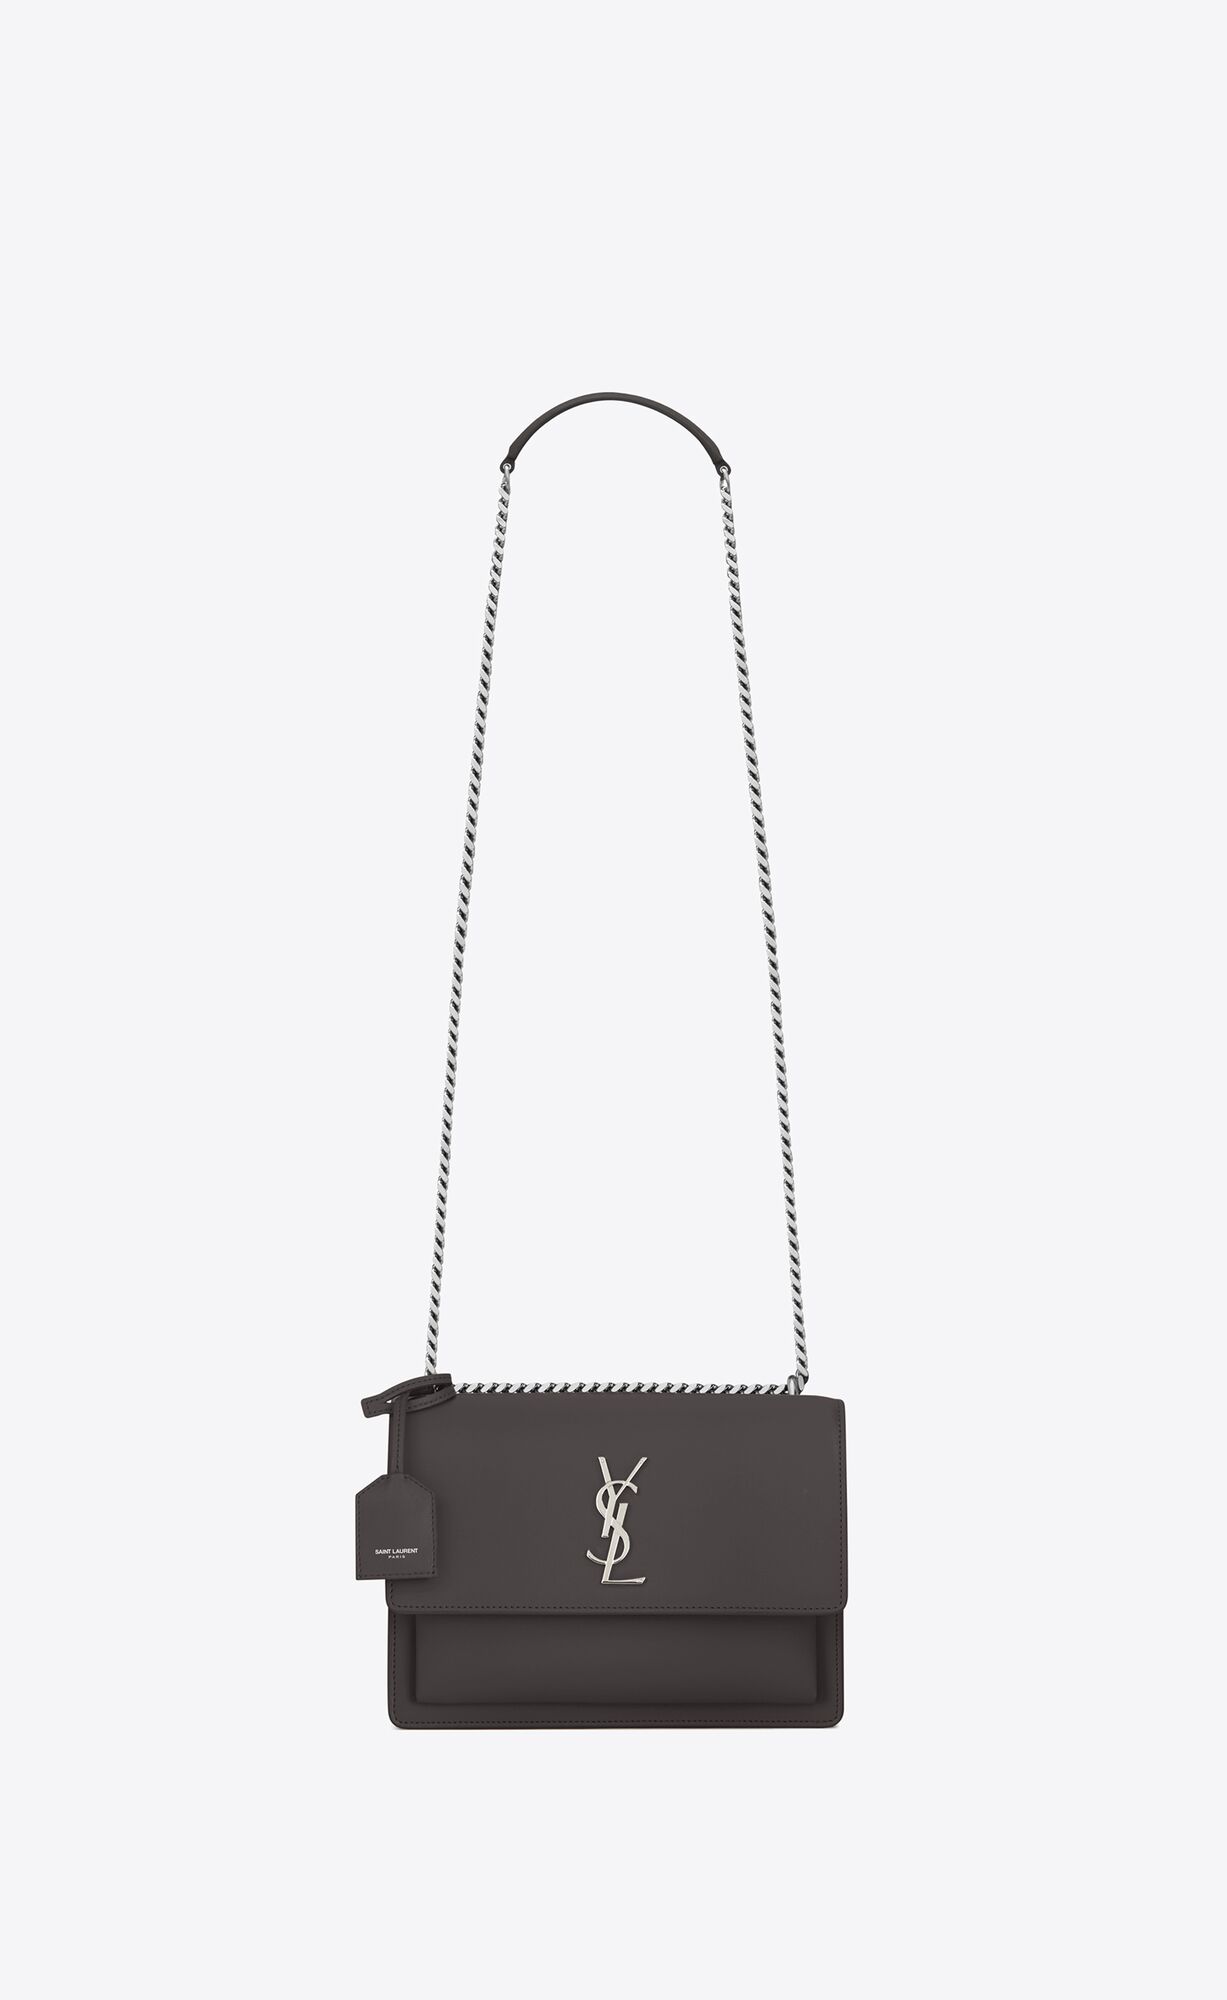 Saint Laurent Sunset Medium Chain Bag In Smooth Leather – Storm – 442906D420N1112